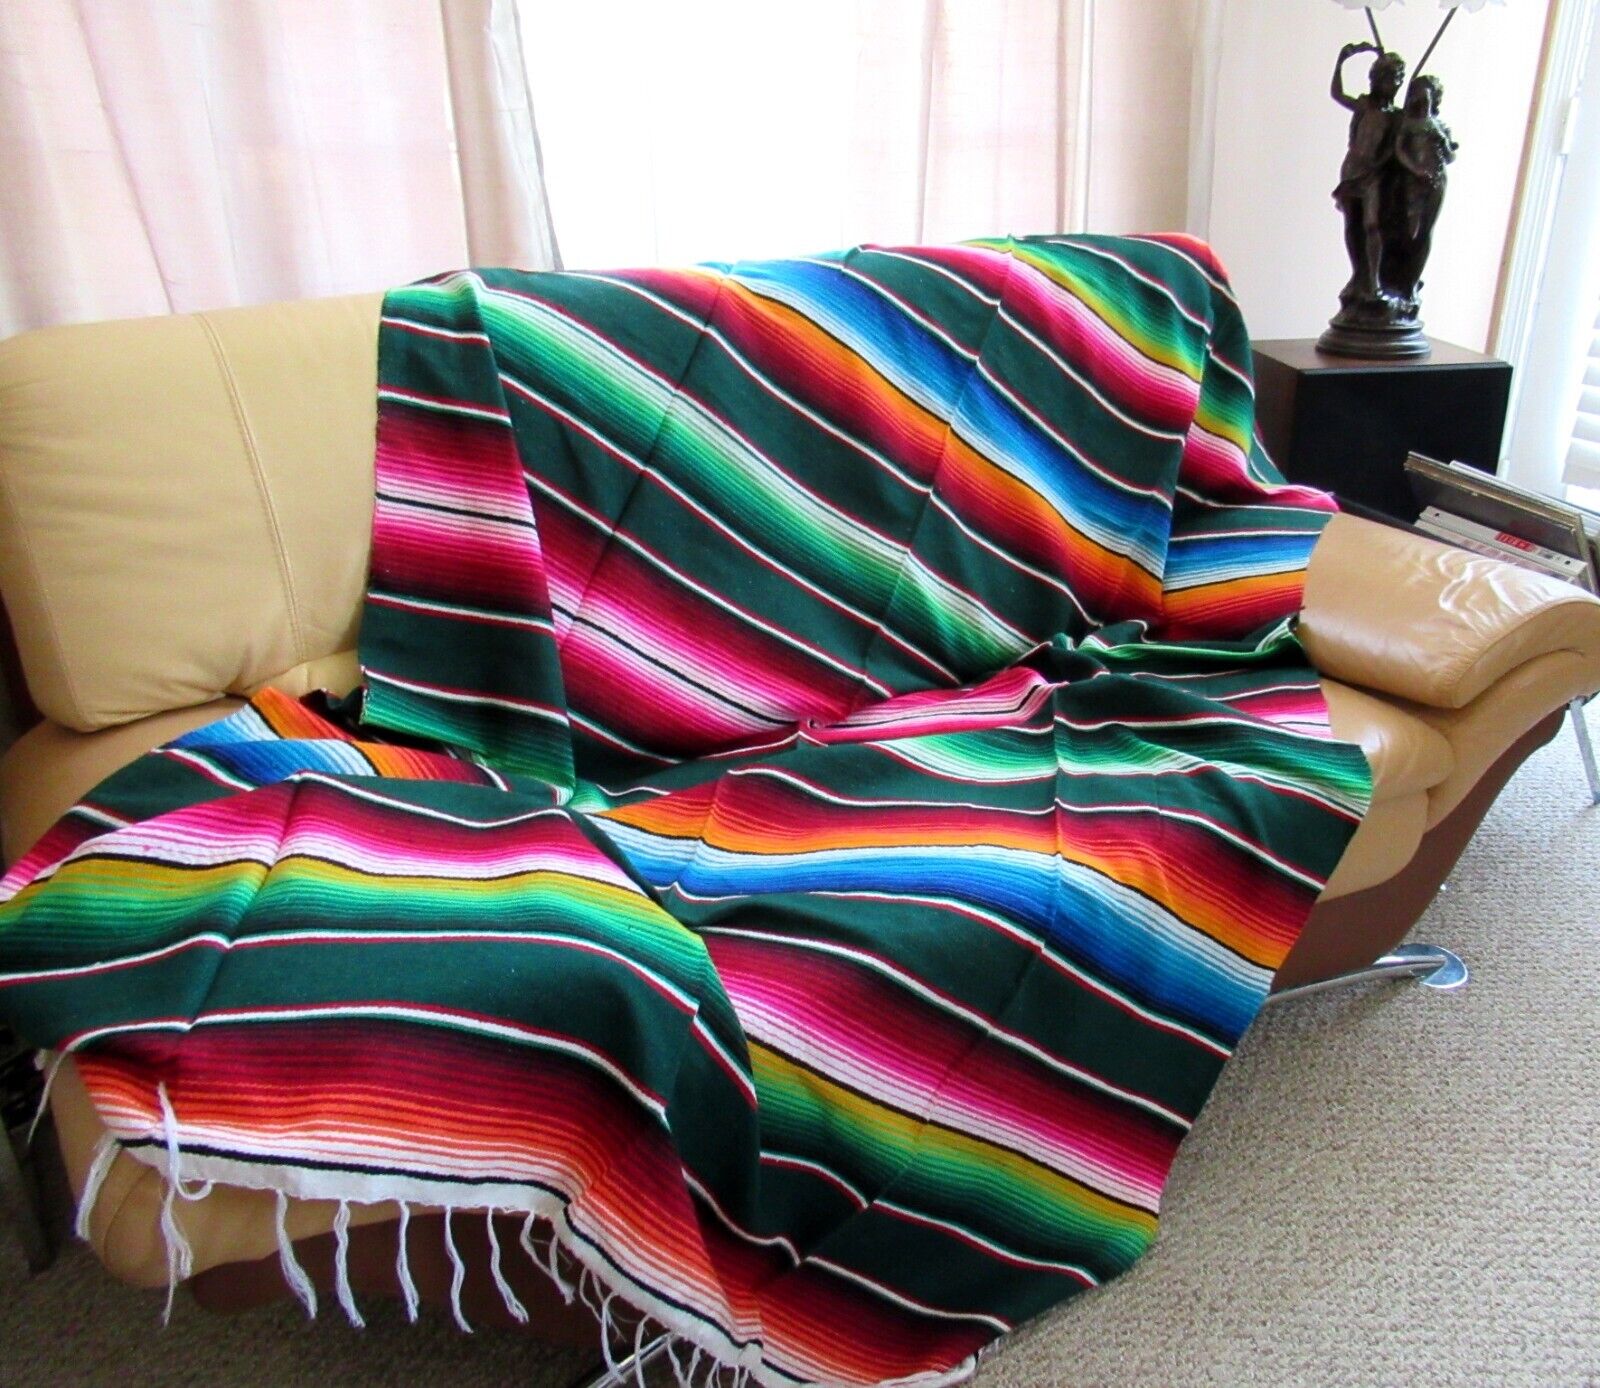 MEXICAN SARAPE SERAPE SALTILLO WOVEN COLORFUL BLANKET 84X59 XLARGE- FROM MEXICO